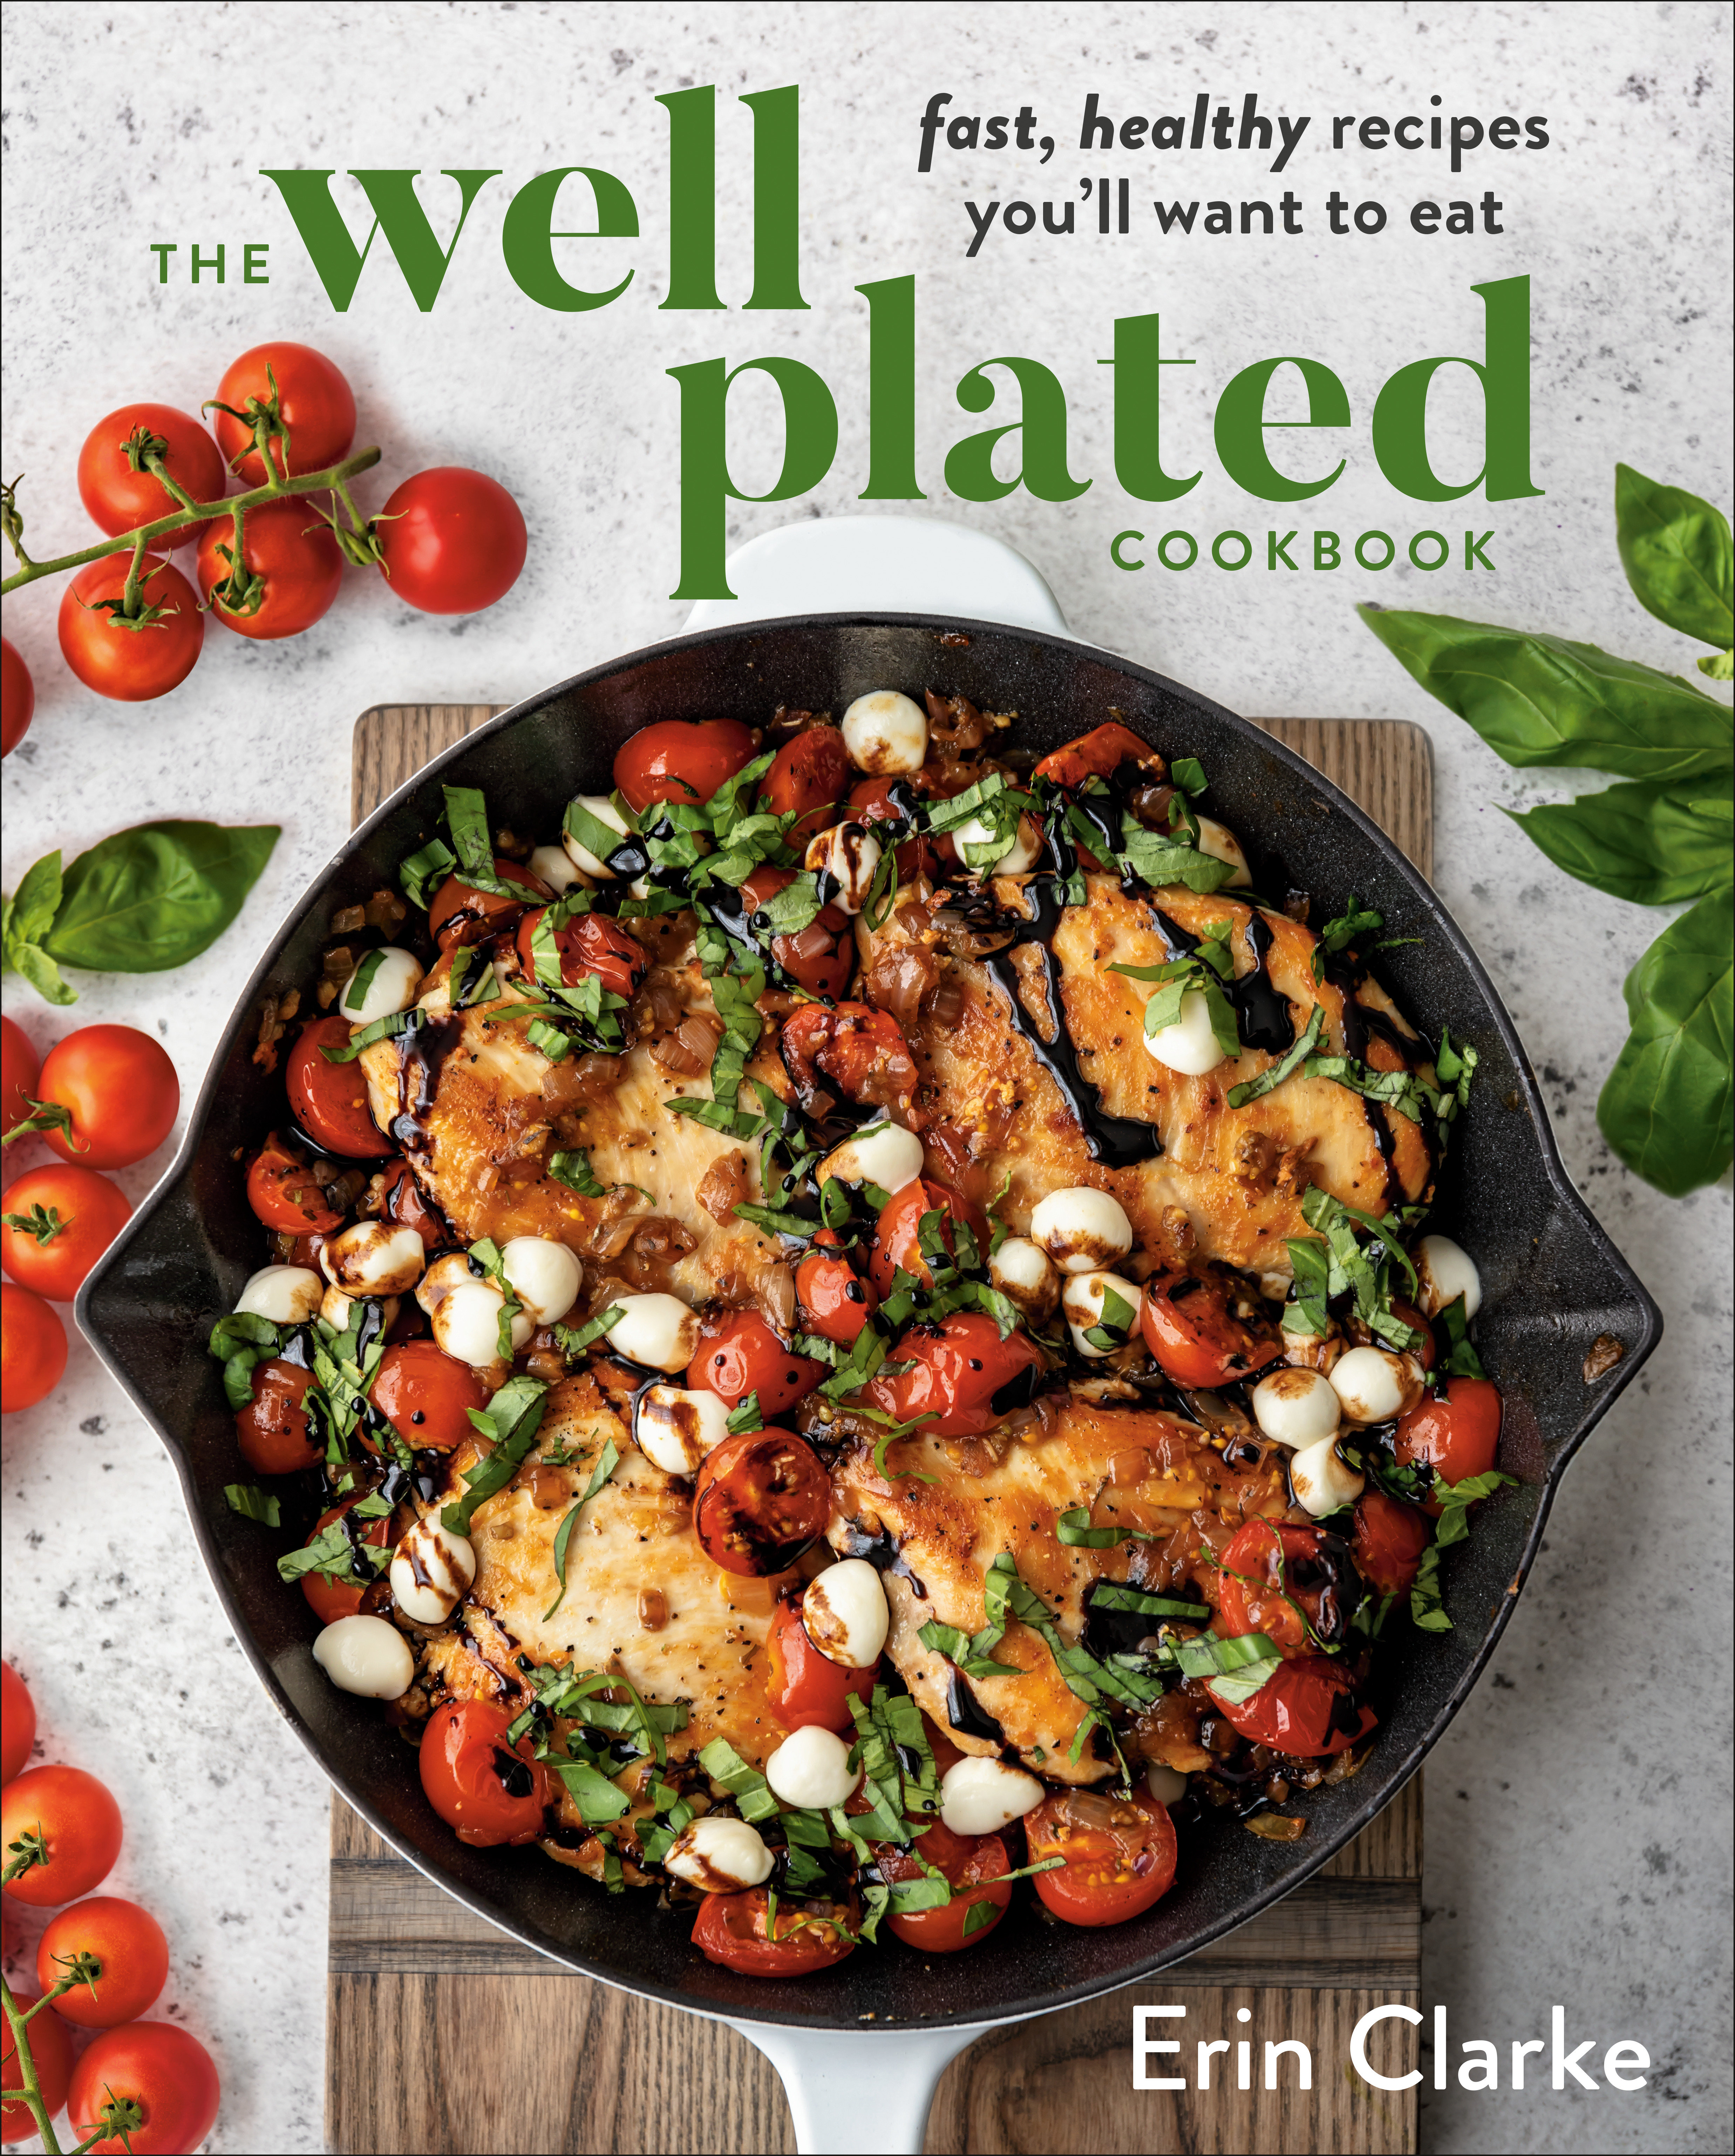 The Well Plated Cookbook (Hardcover Book)